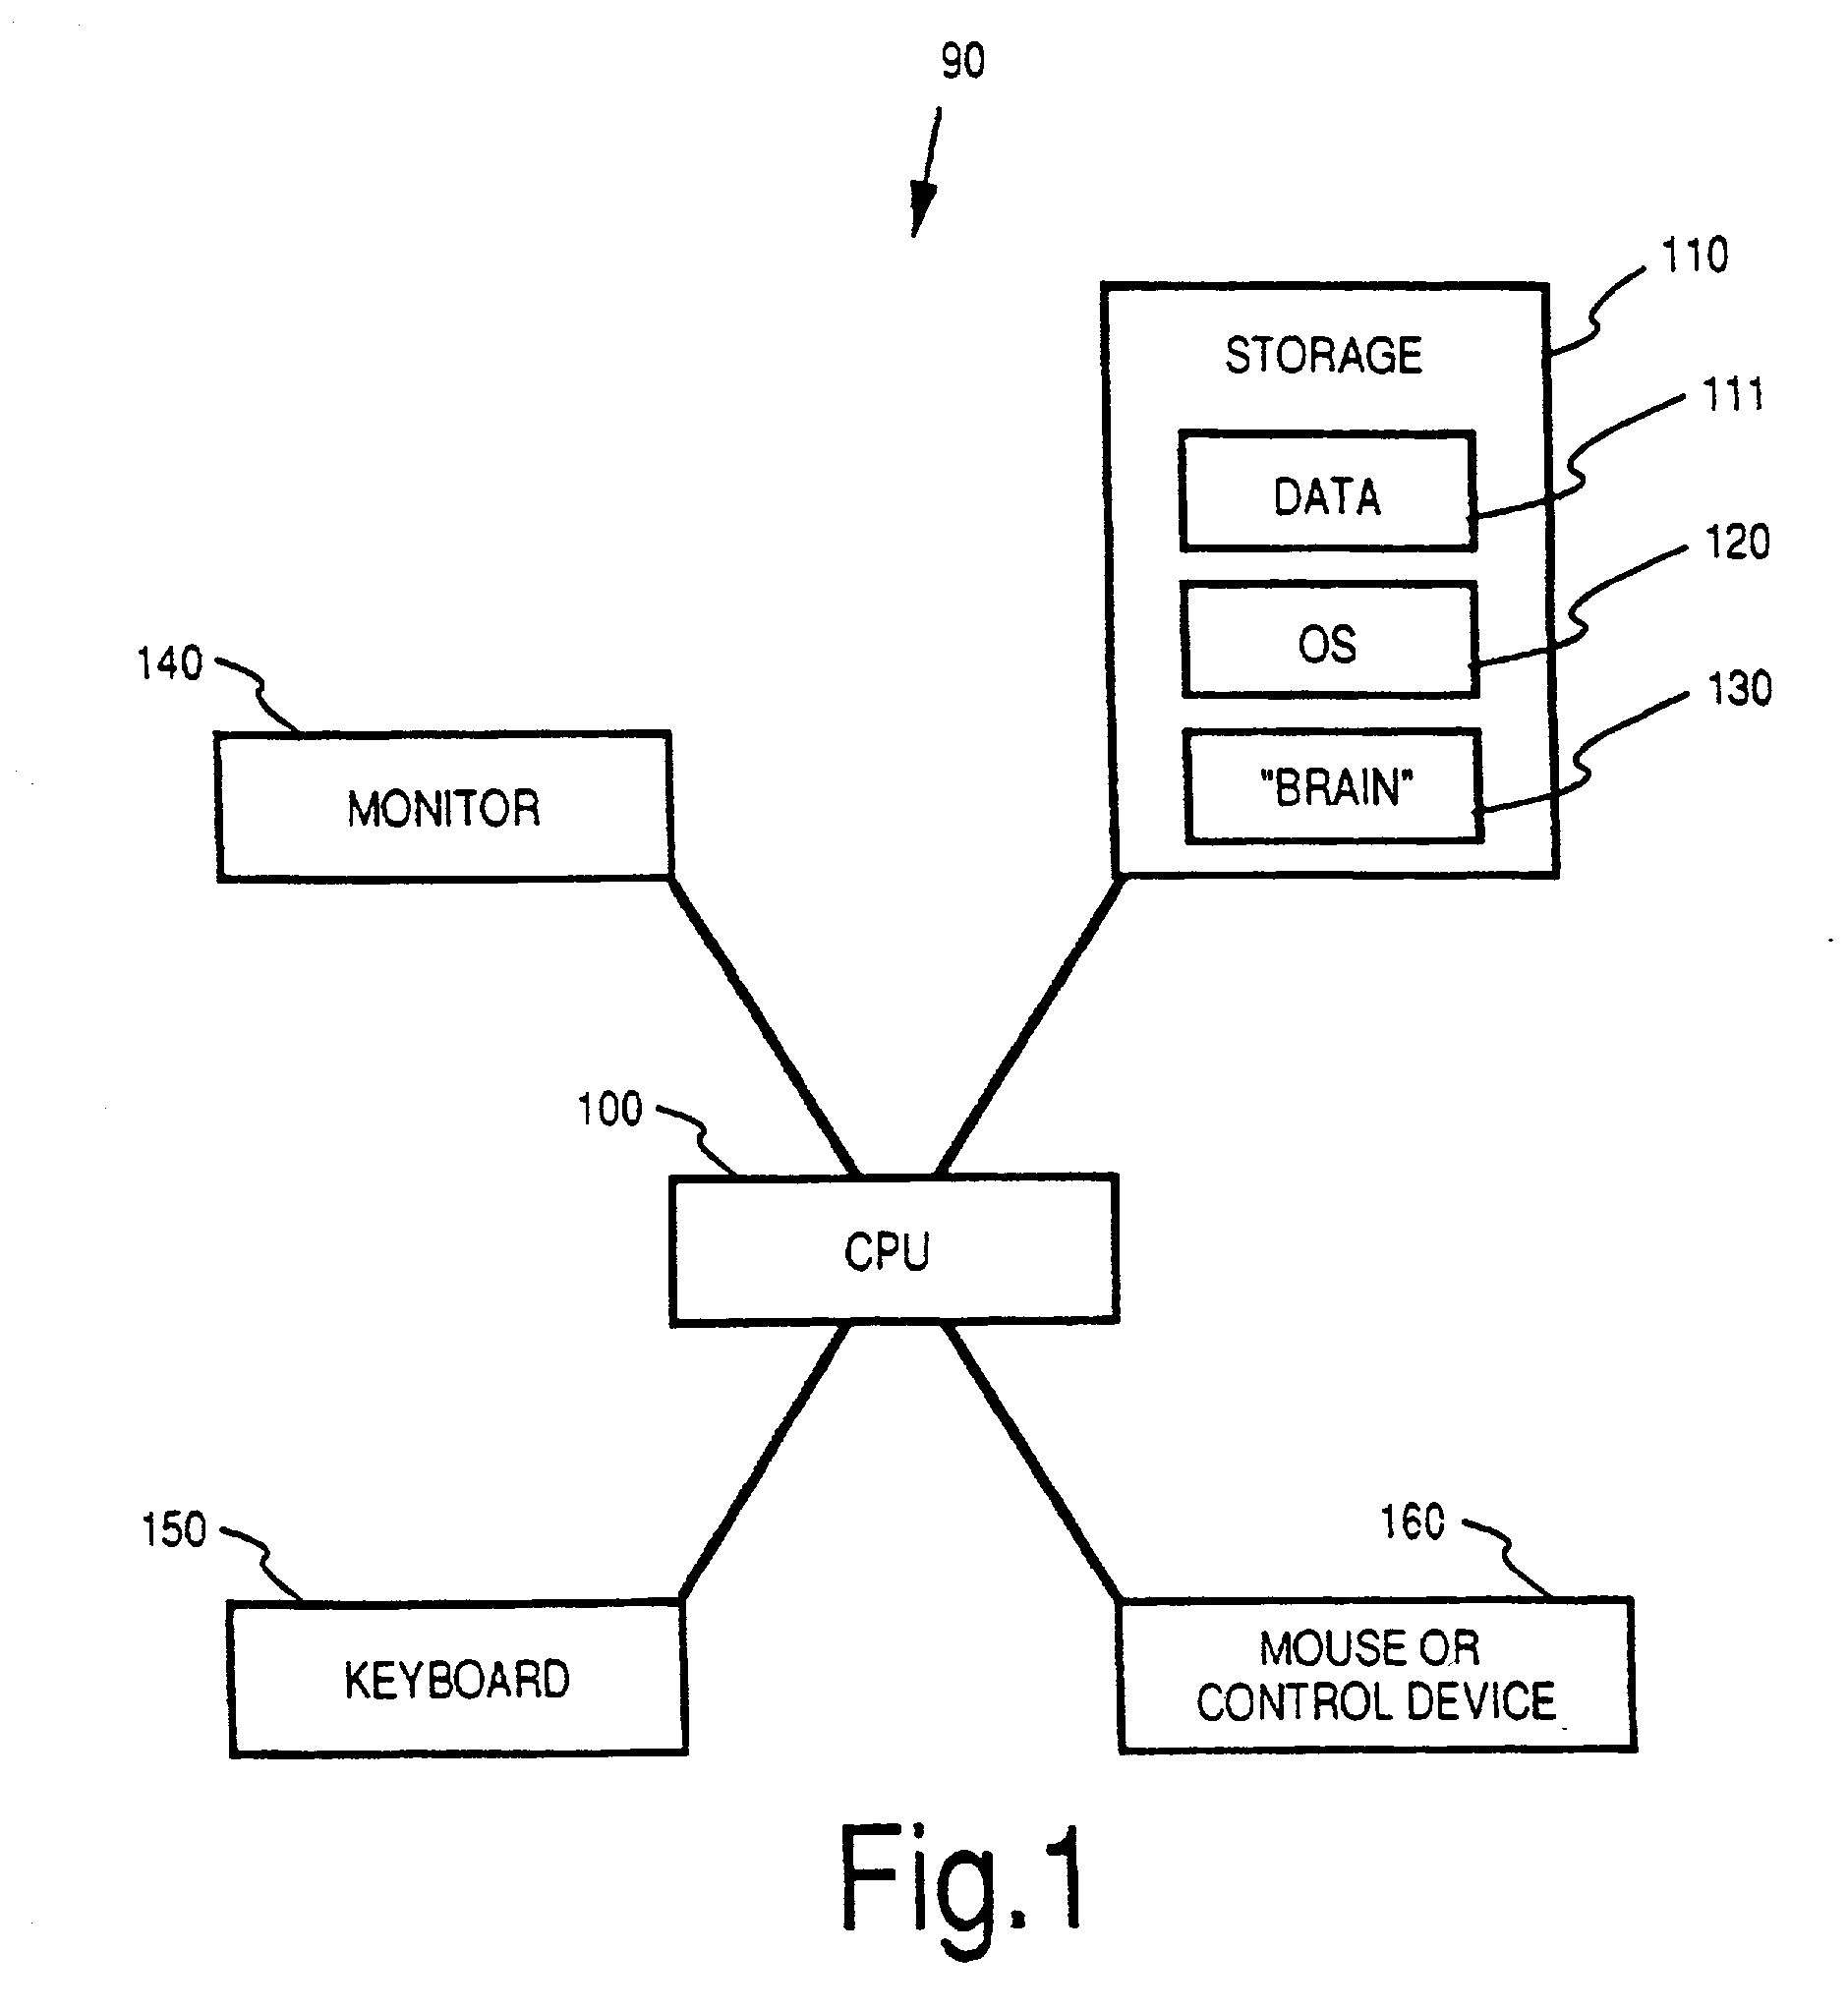 Method and apparatus for communicating changes from and to a shared associative database using one-way communications techniques